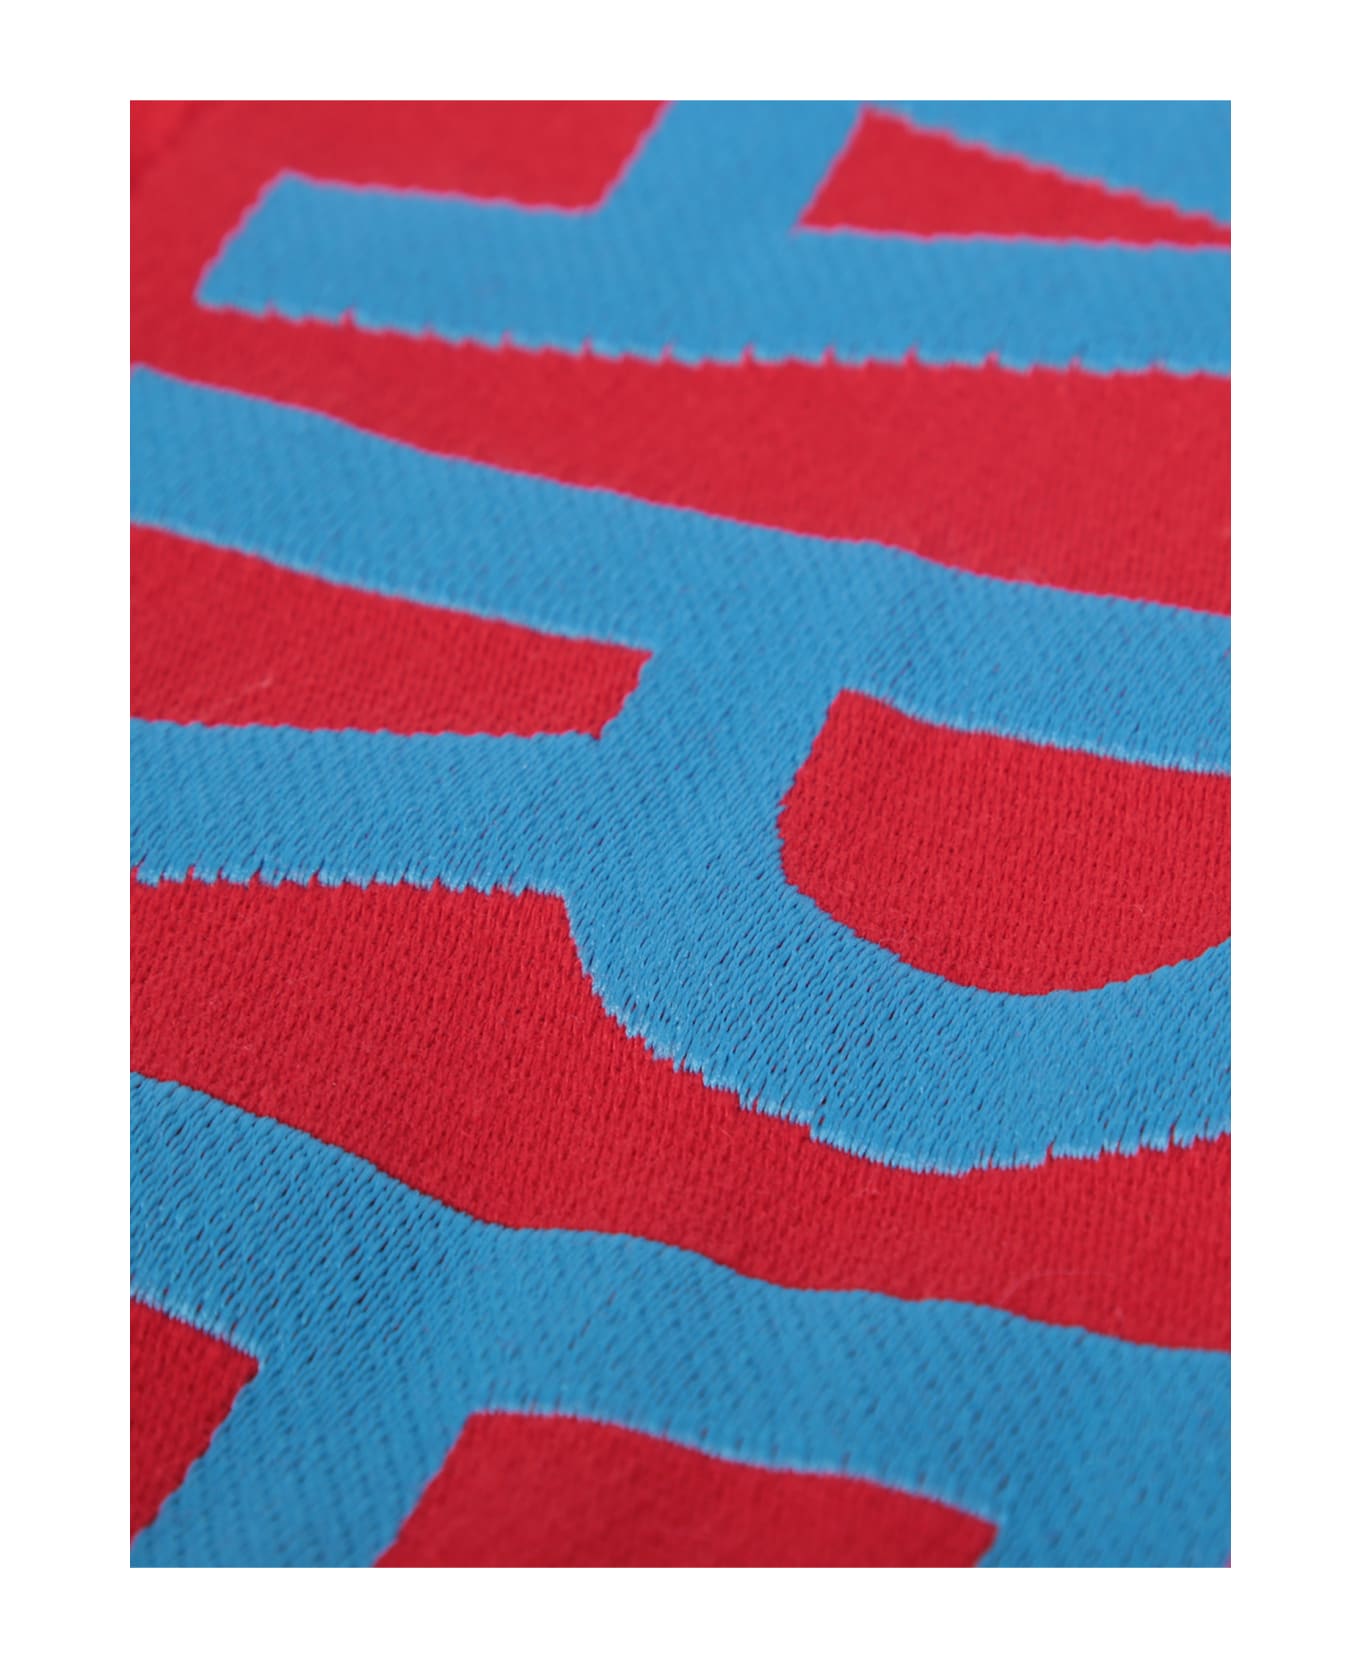 Dsquared2 Red/ Blue Technicolor Beach Towel - Red